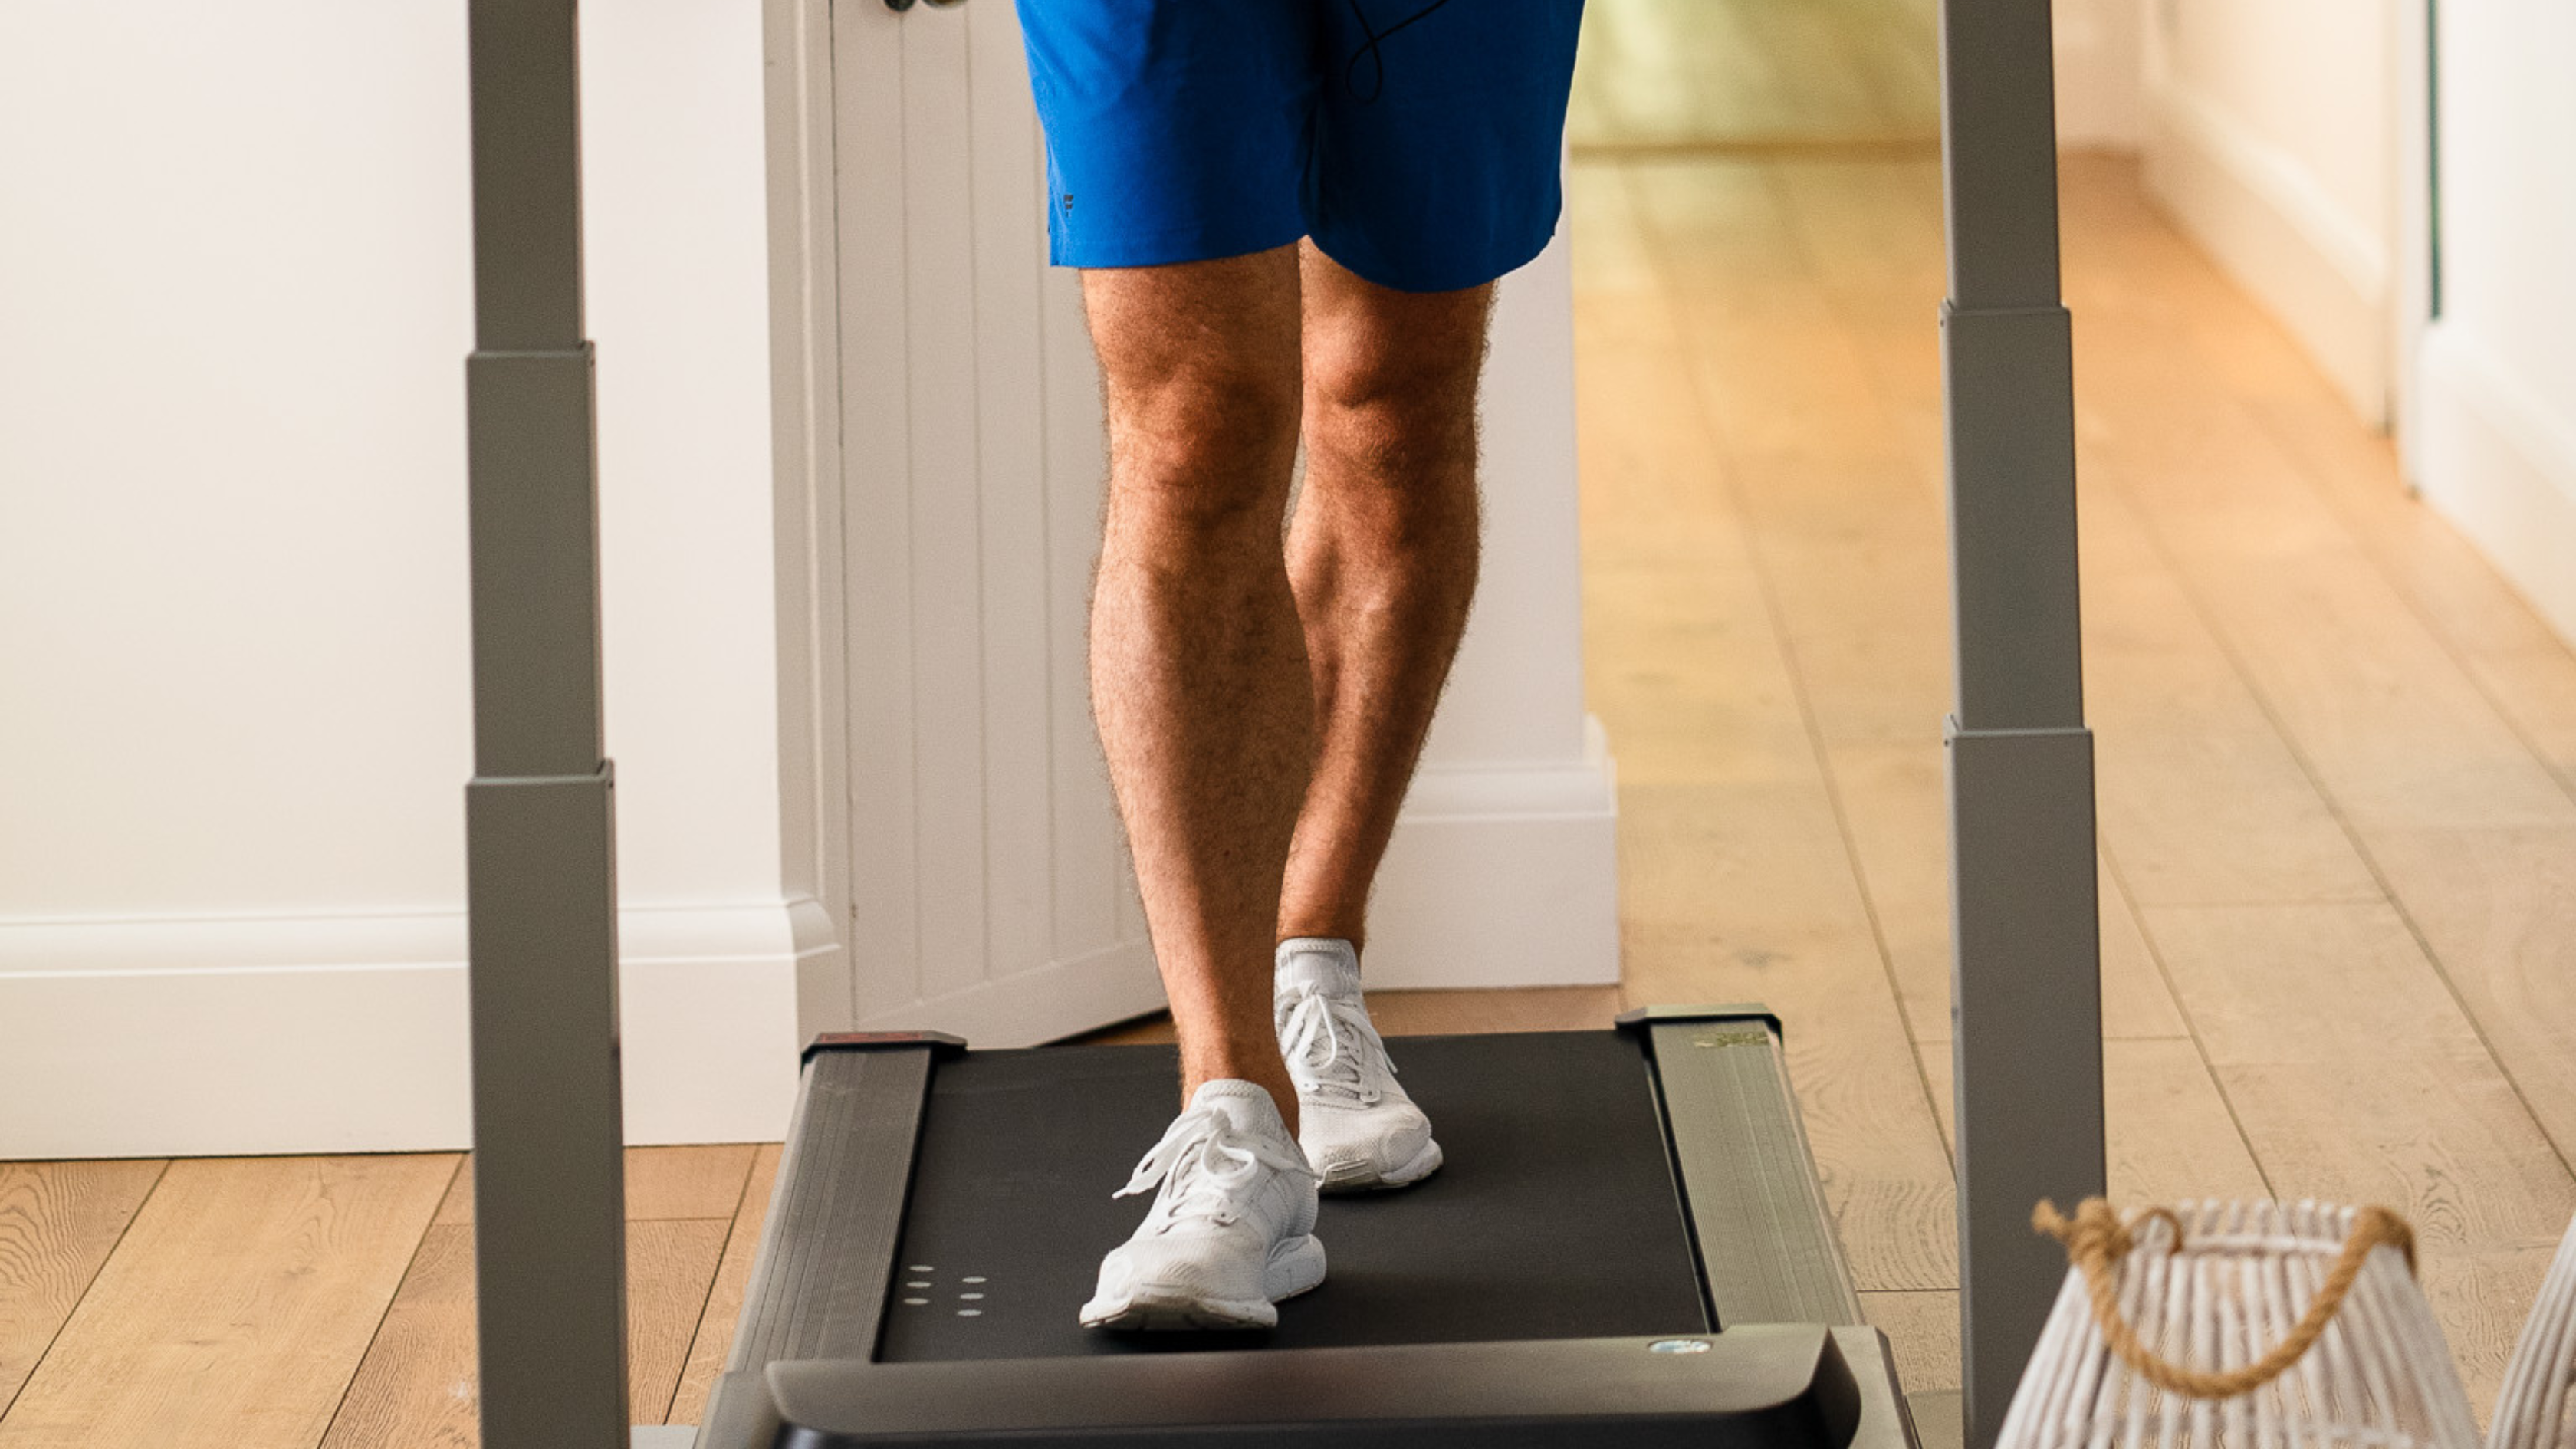 Walking Your Way to Health: Achieving 10,000 Steps on a Treadmill